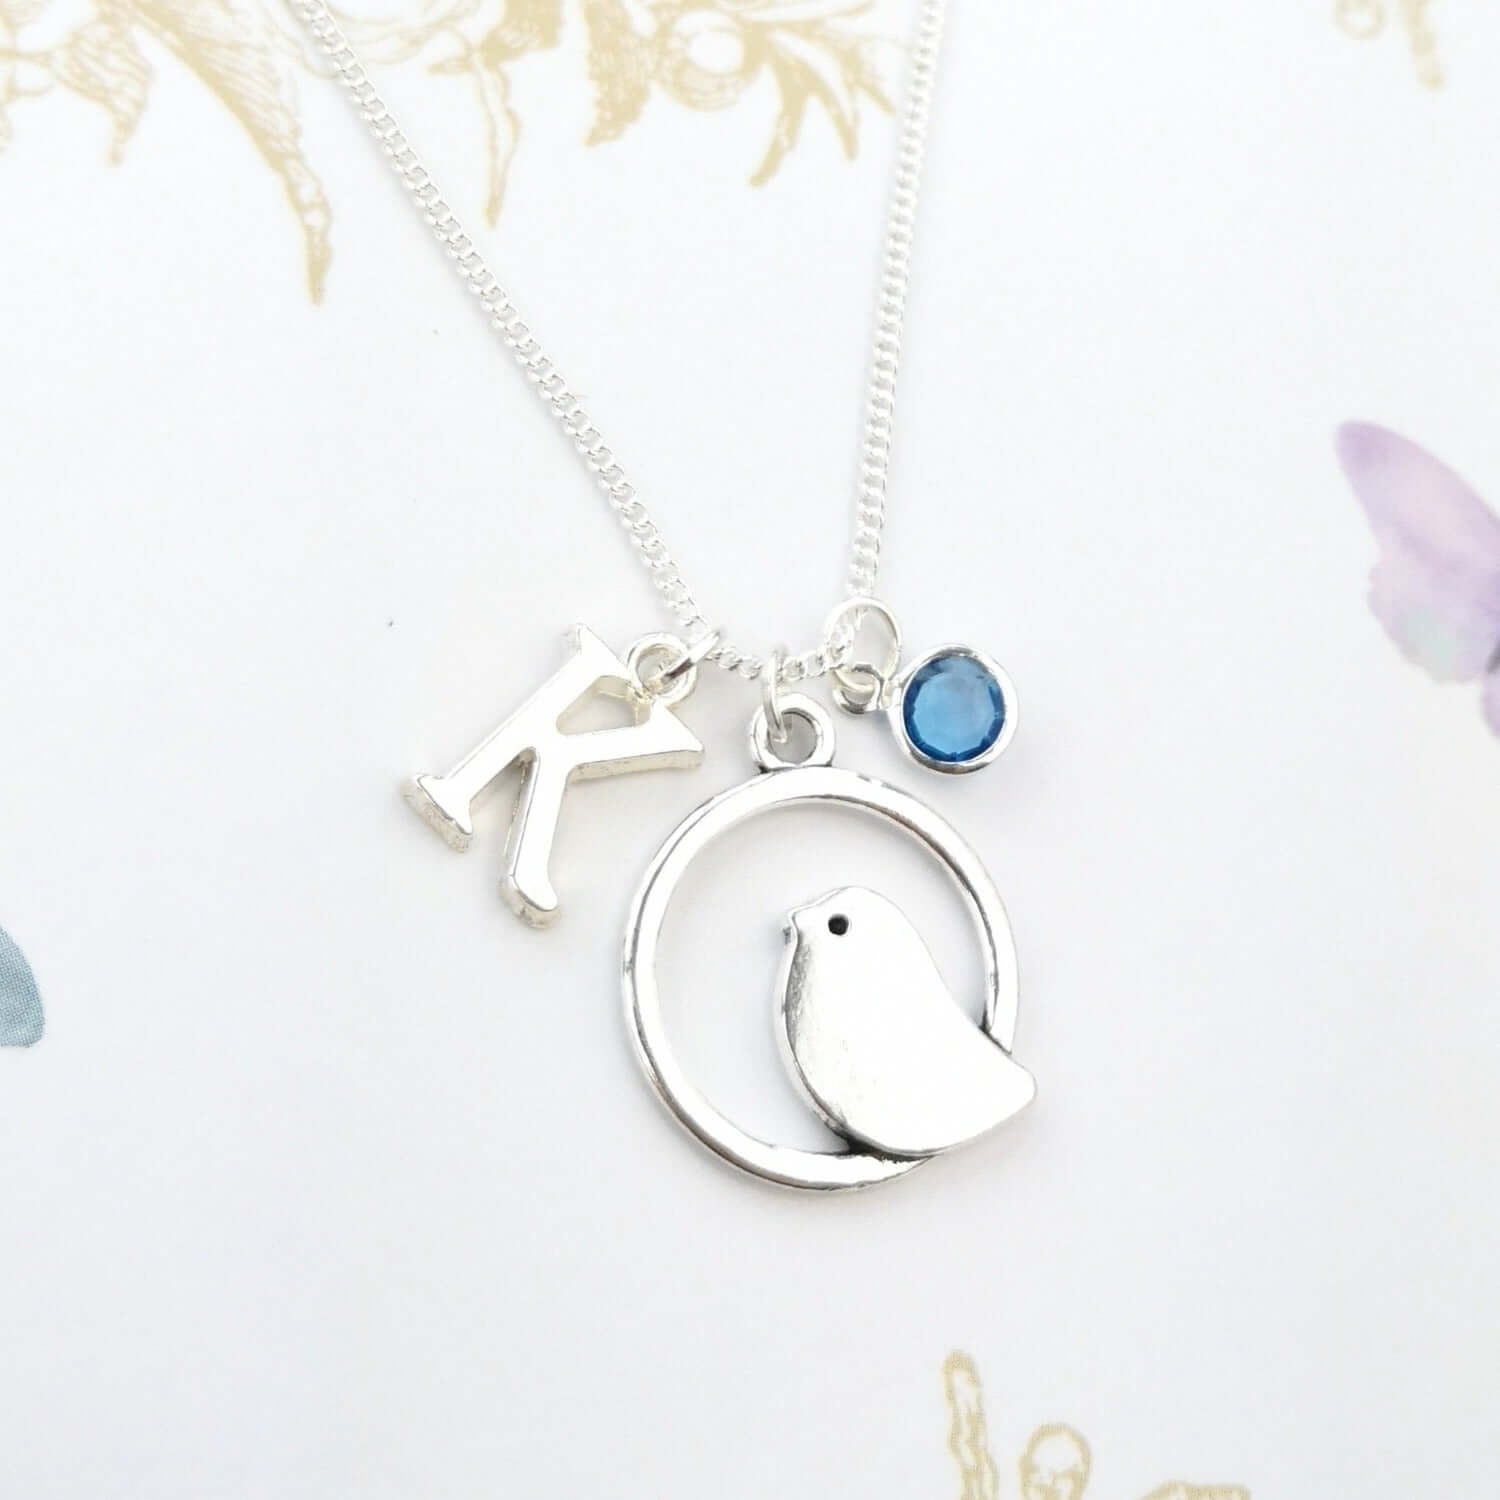 Personalised bird necklace with initial and birthstone